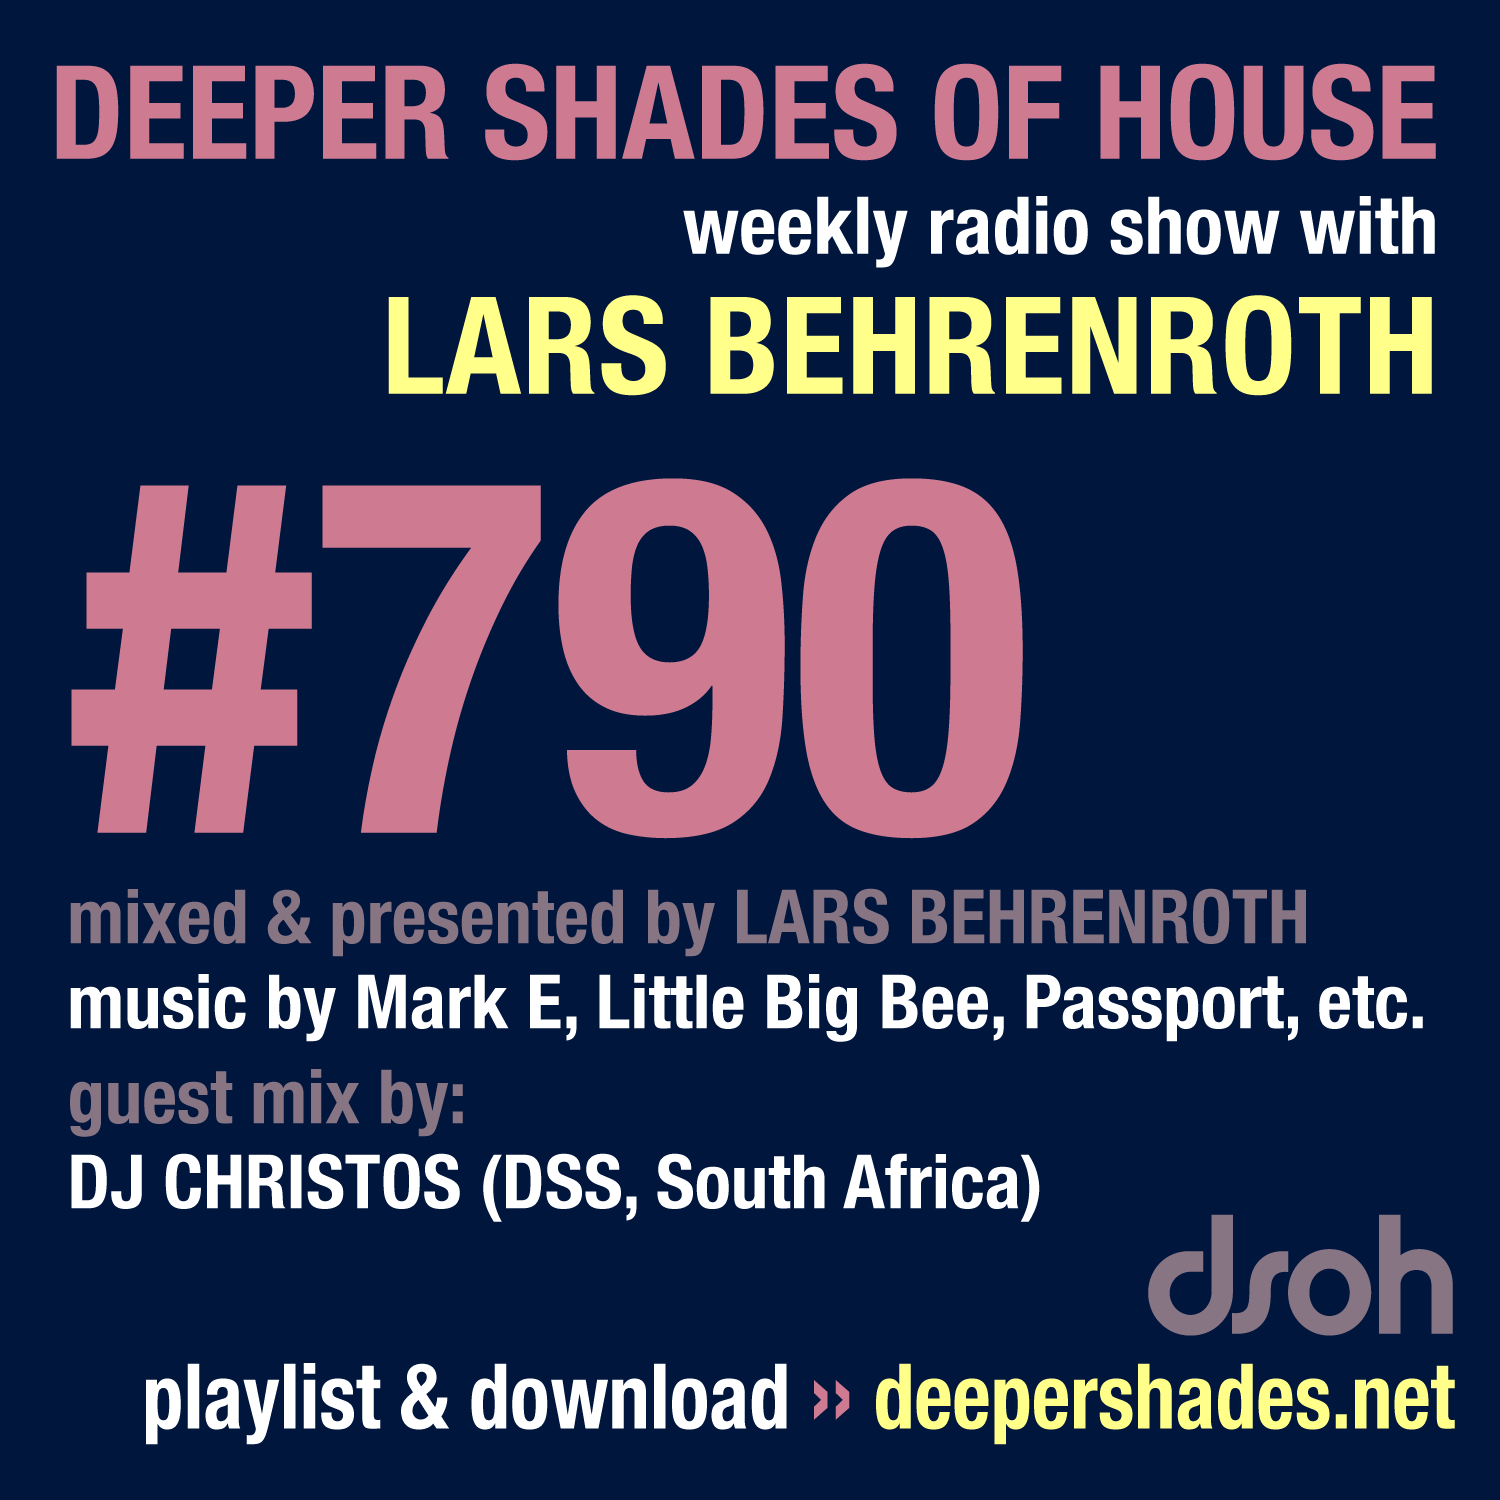 #790 Deeper Shades of House